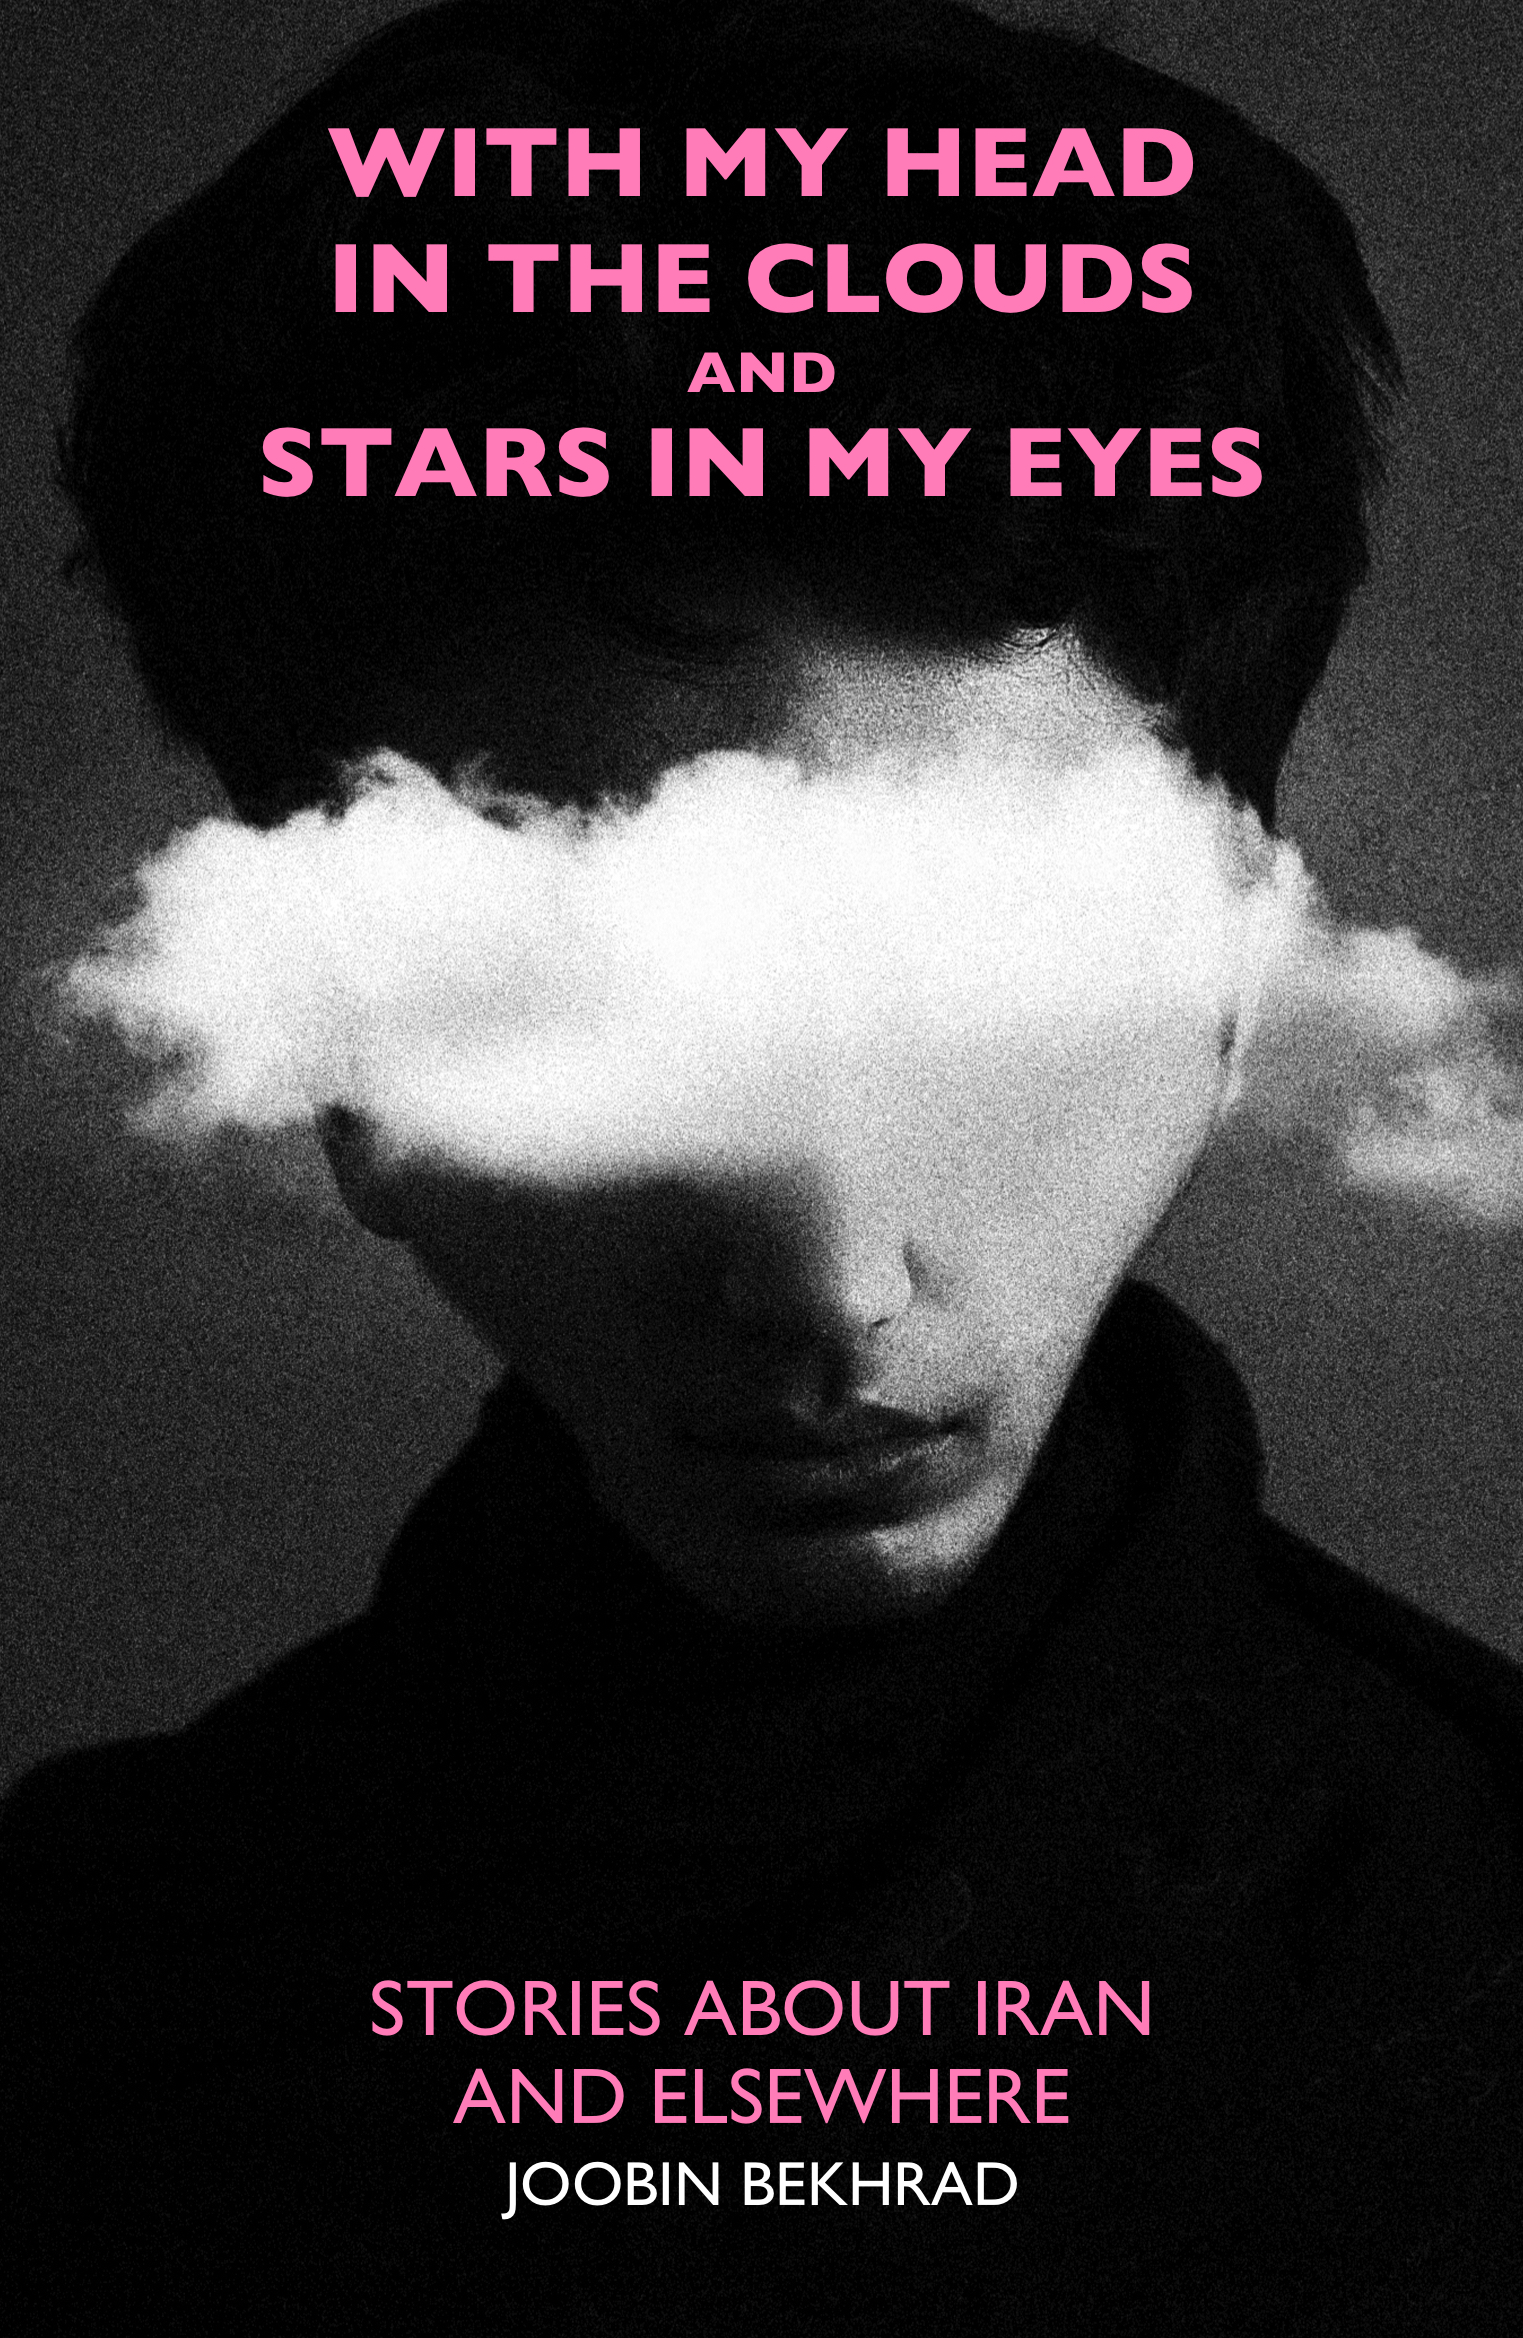 With My Head in the Clouds and Stars in My Eyes